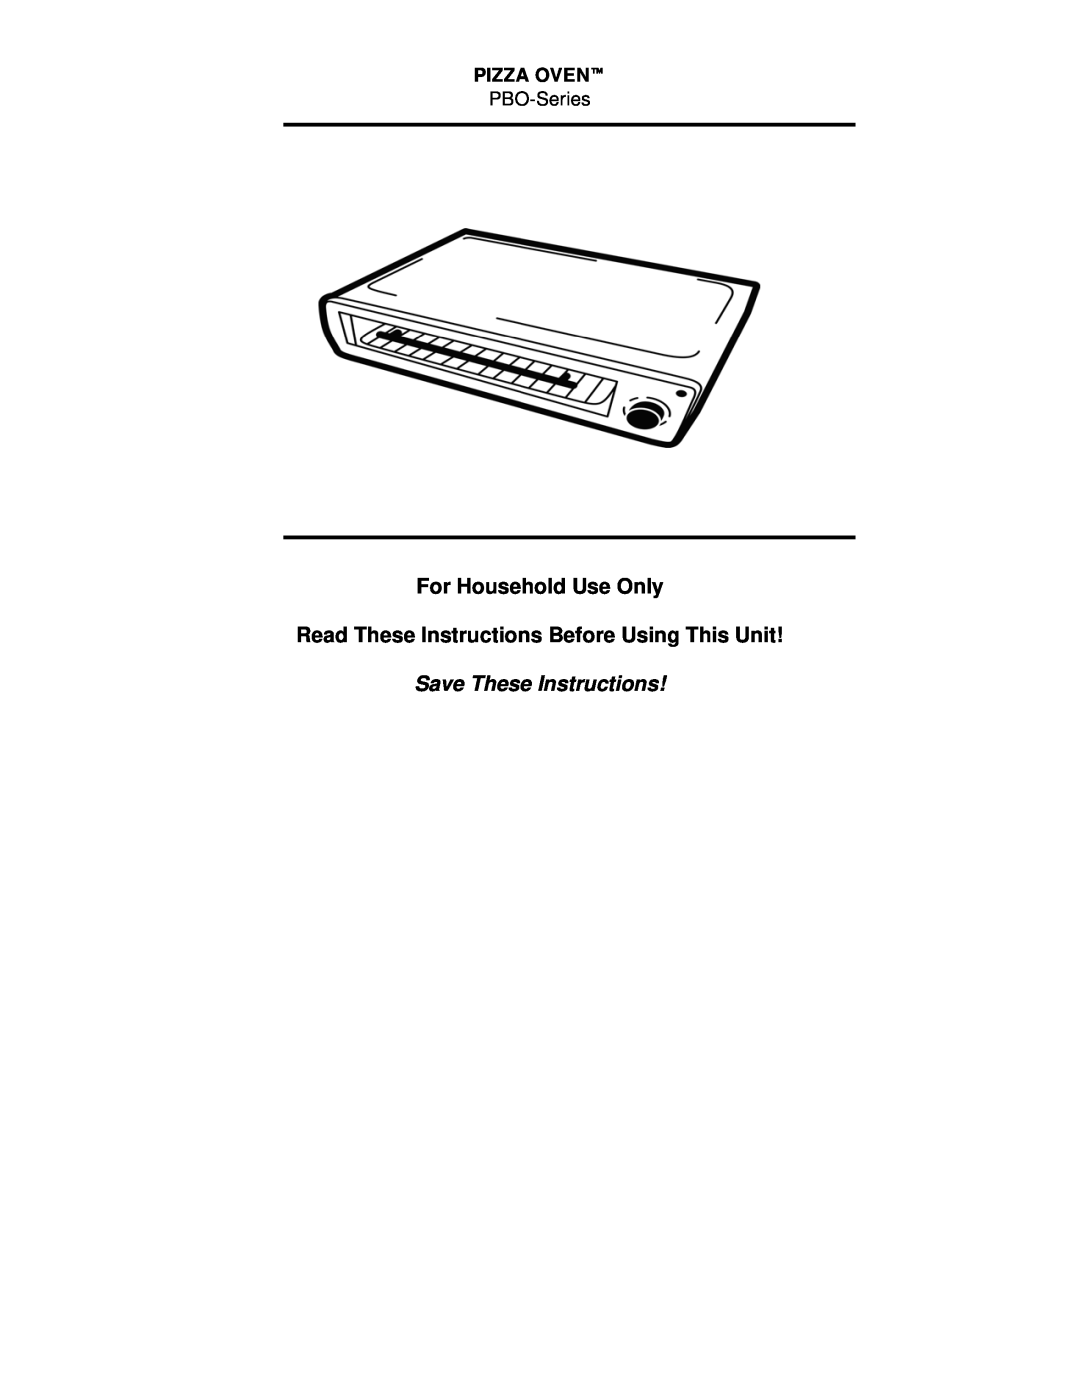 Nostalgia Electrics PBO-220 manual For Household Use Only, Read These Instructions Before Using This Unit, Pizza Oven 